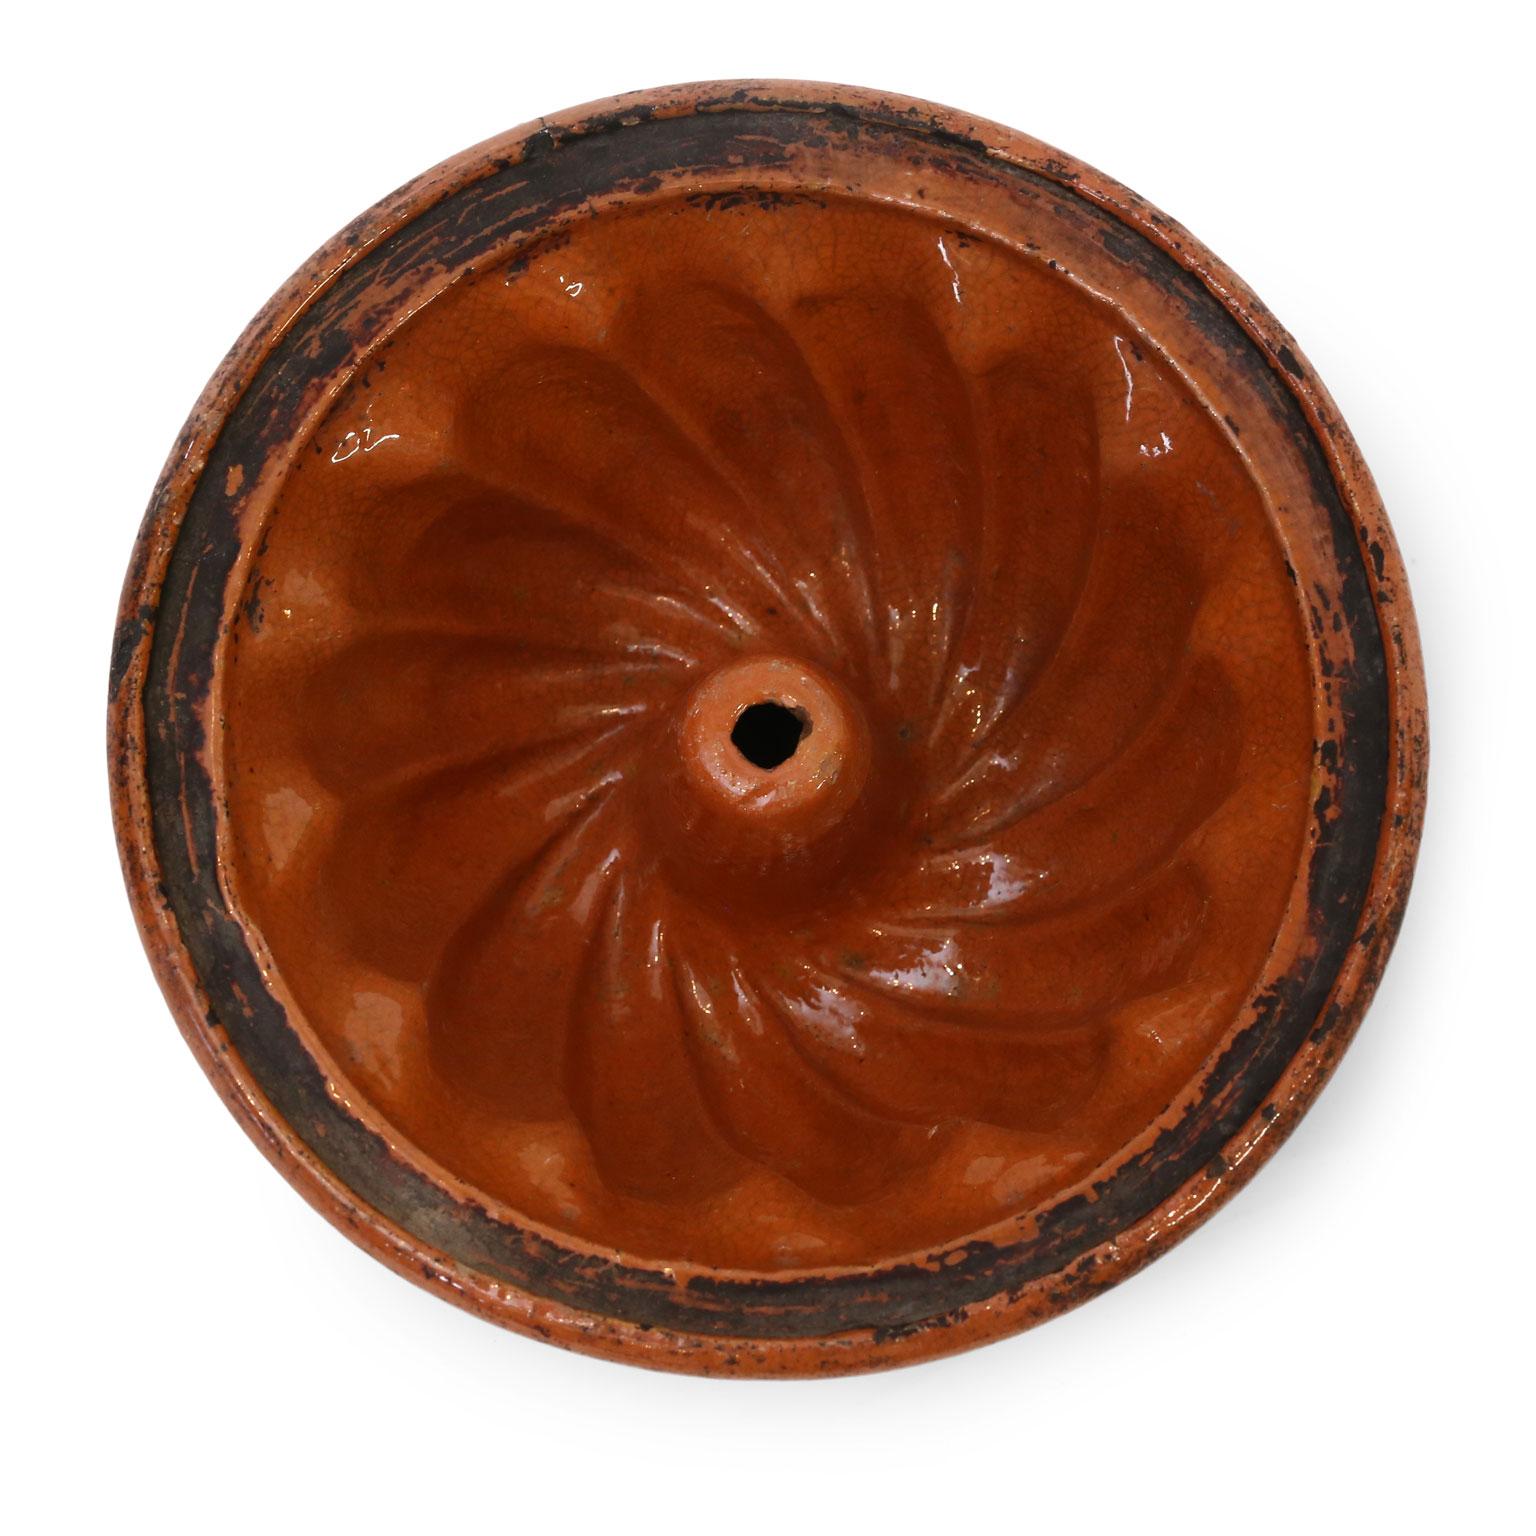 French Kouglof mold, in a ruddy-terracotta color glaze, from Alsace. Glazed refractory earthenware bunt cake mold dating to the late 18th or early 19th century.